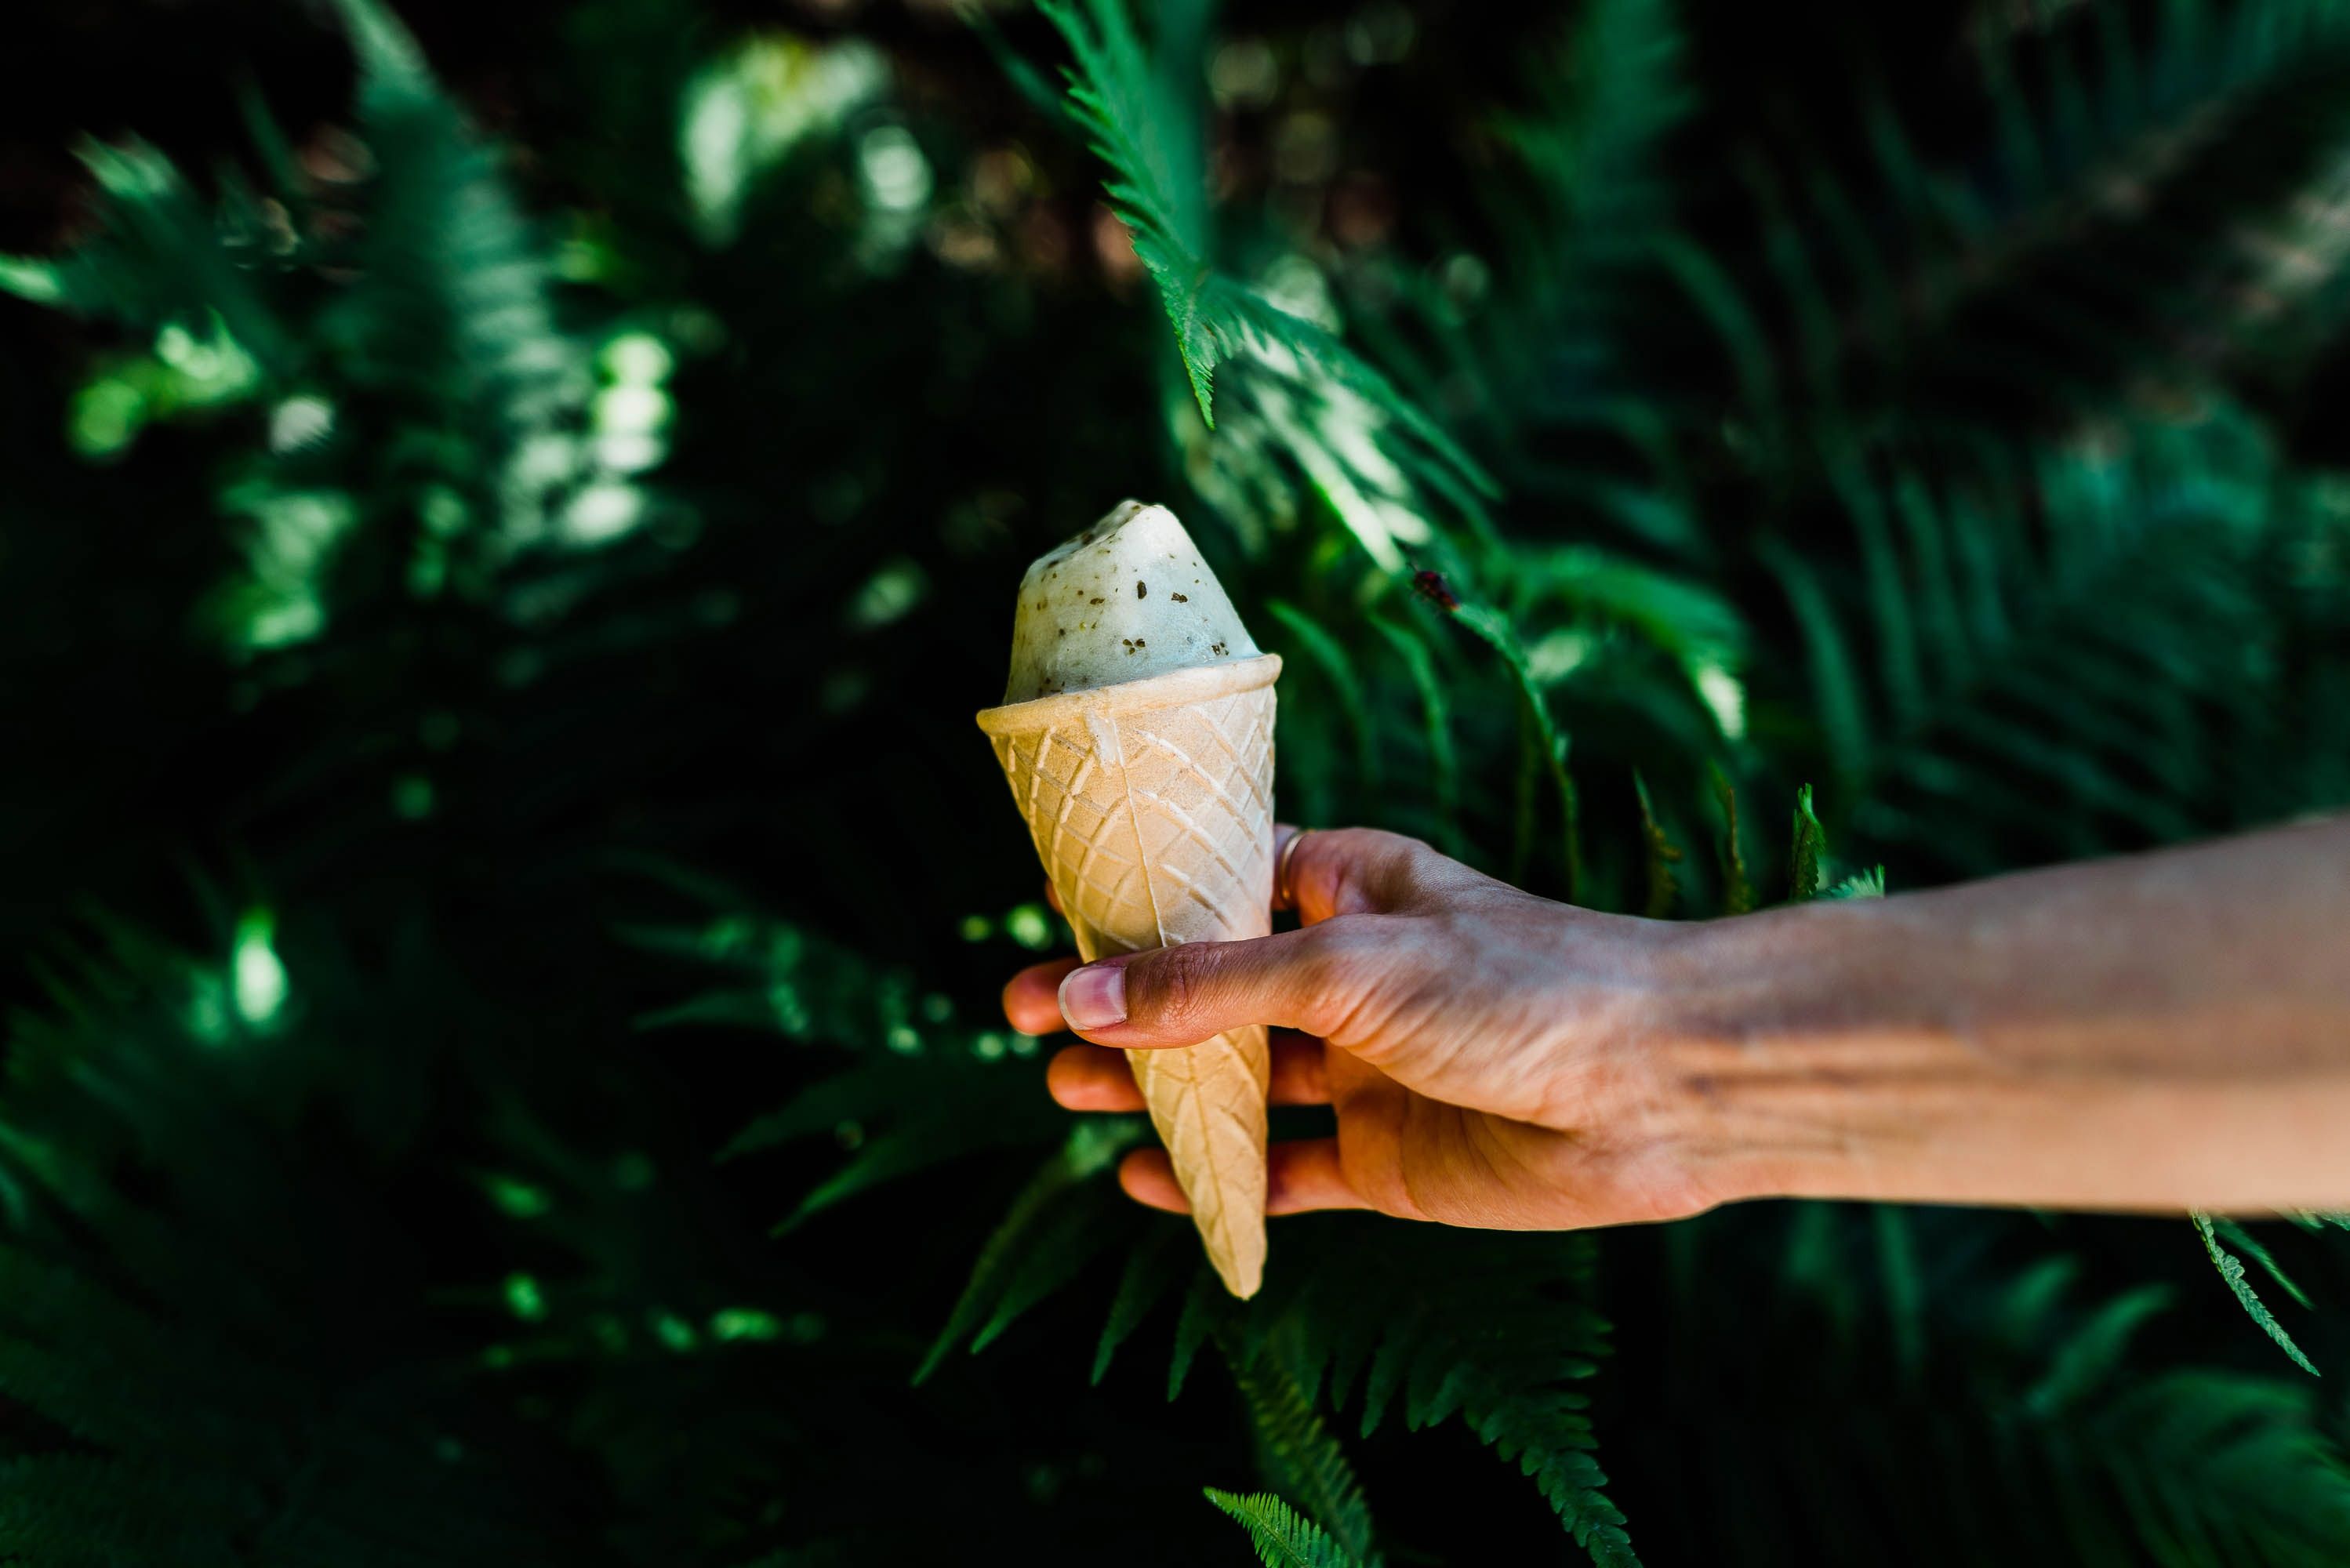 2997x2000 #spring, #arm, #holding ice cream, #PNG image, #greenery, #mint choc chip, #vibrant, #hold, #mint chocolate chip, #ice cream, #forest, #hand, #cone, #summer, #handholding HD Wallpaper